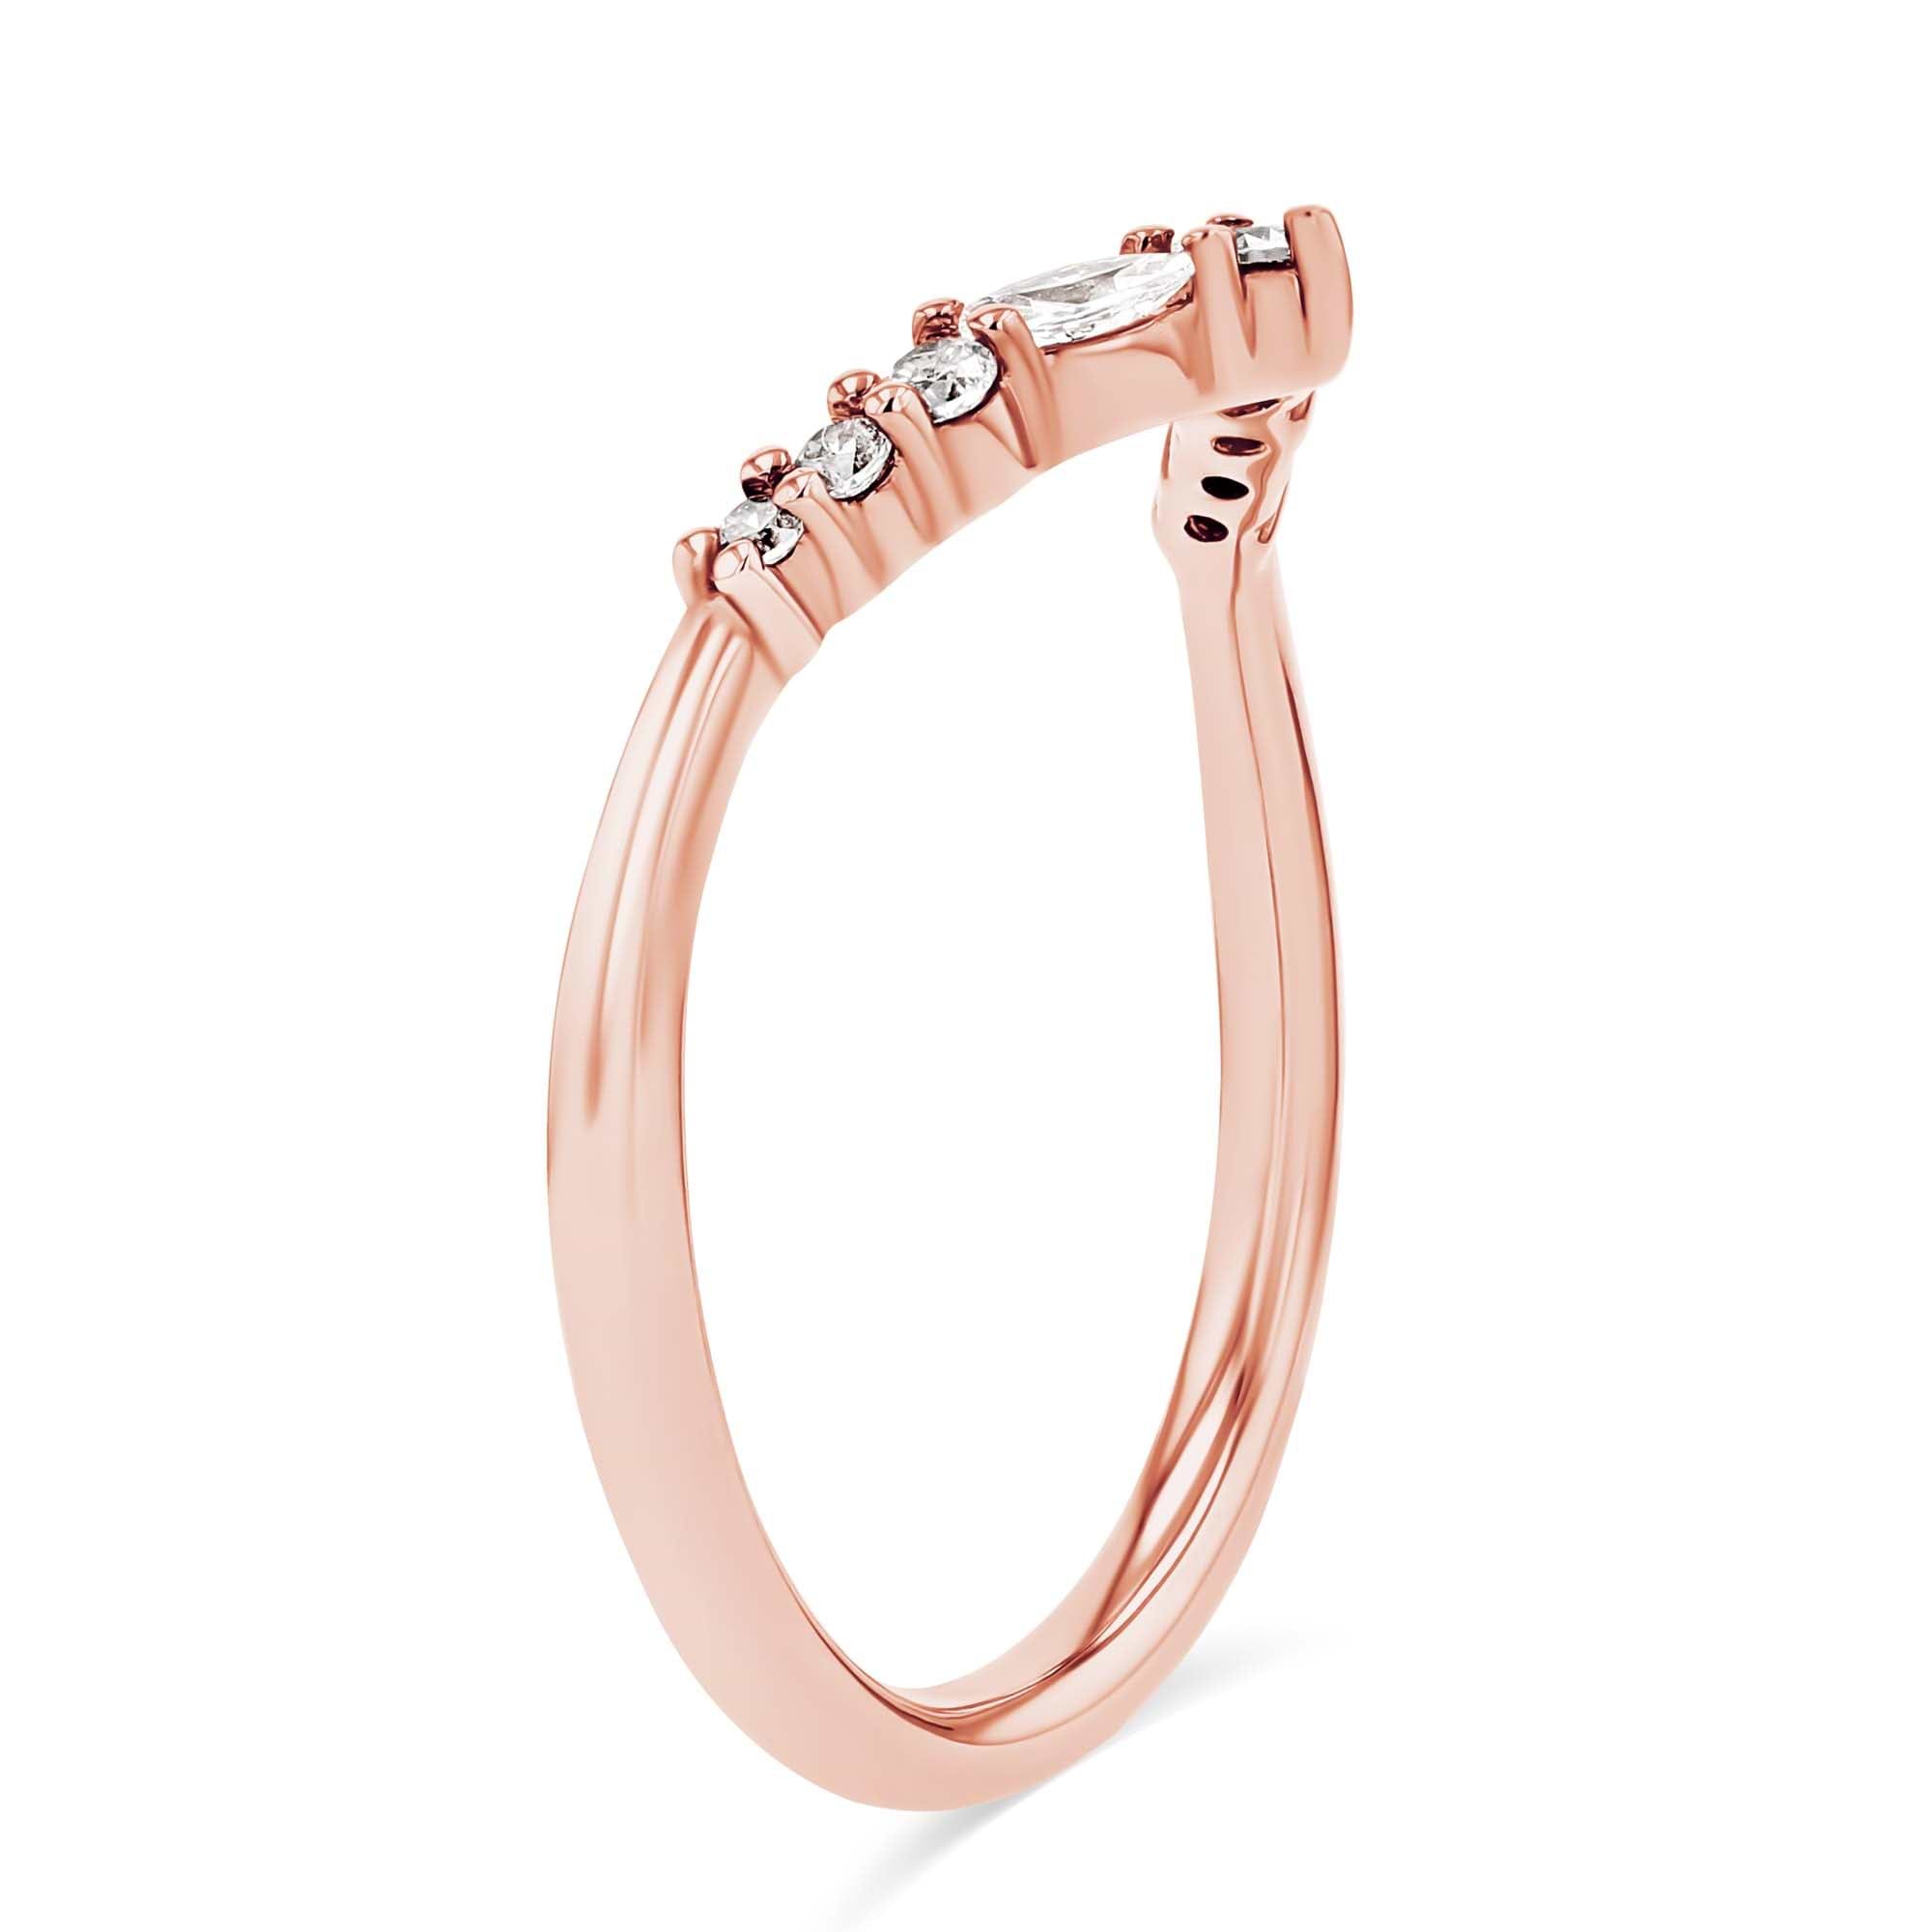 Shown in 14K Rose Gold|lab grown diamond beautiful accented contour wedding band in 14k rose gold metal